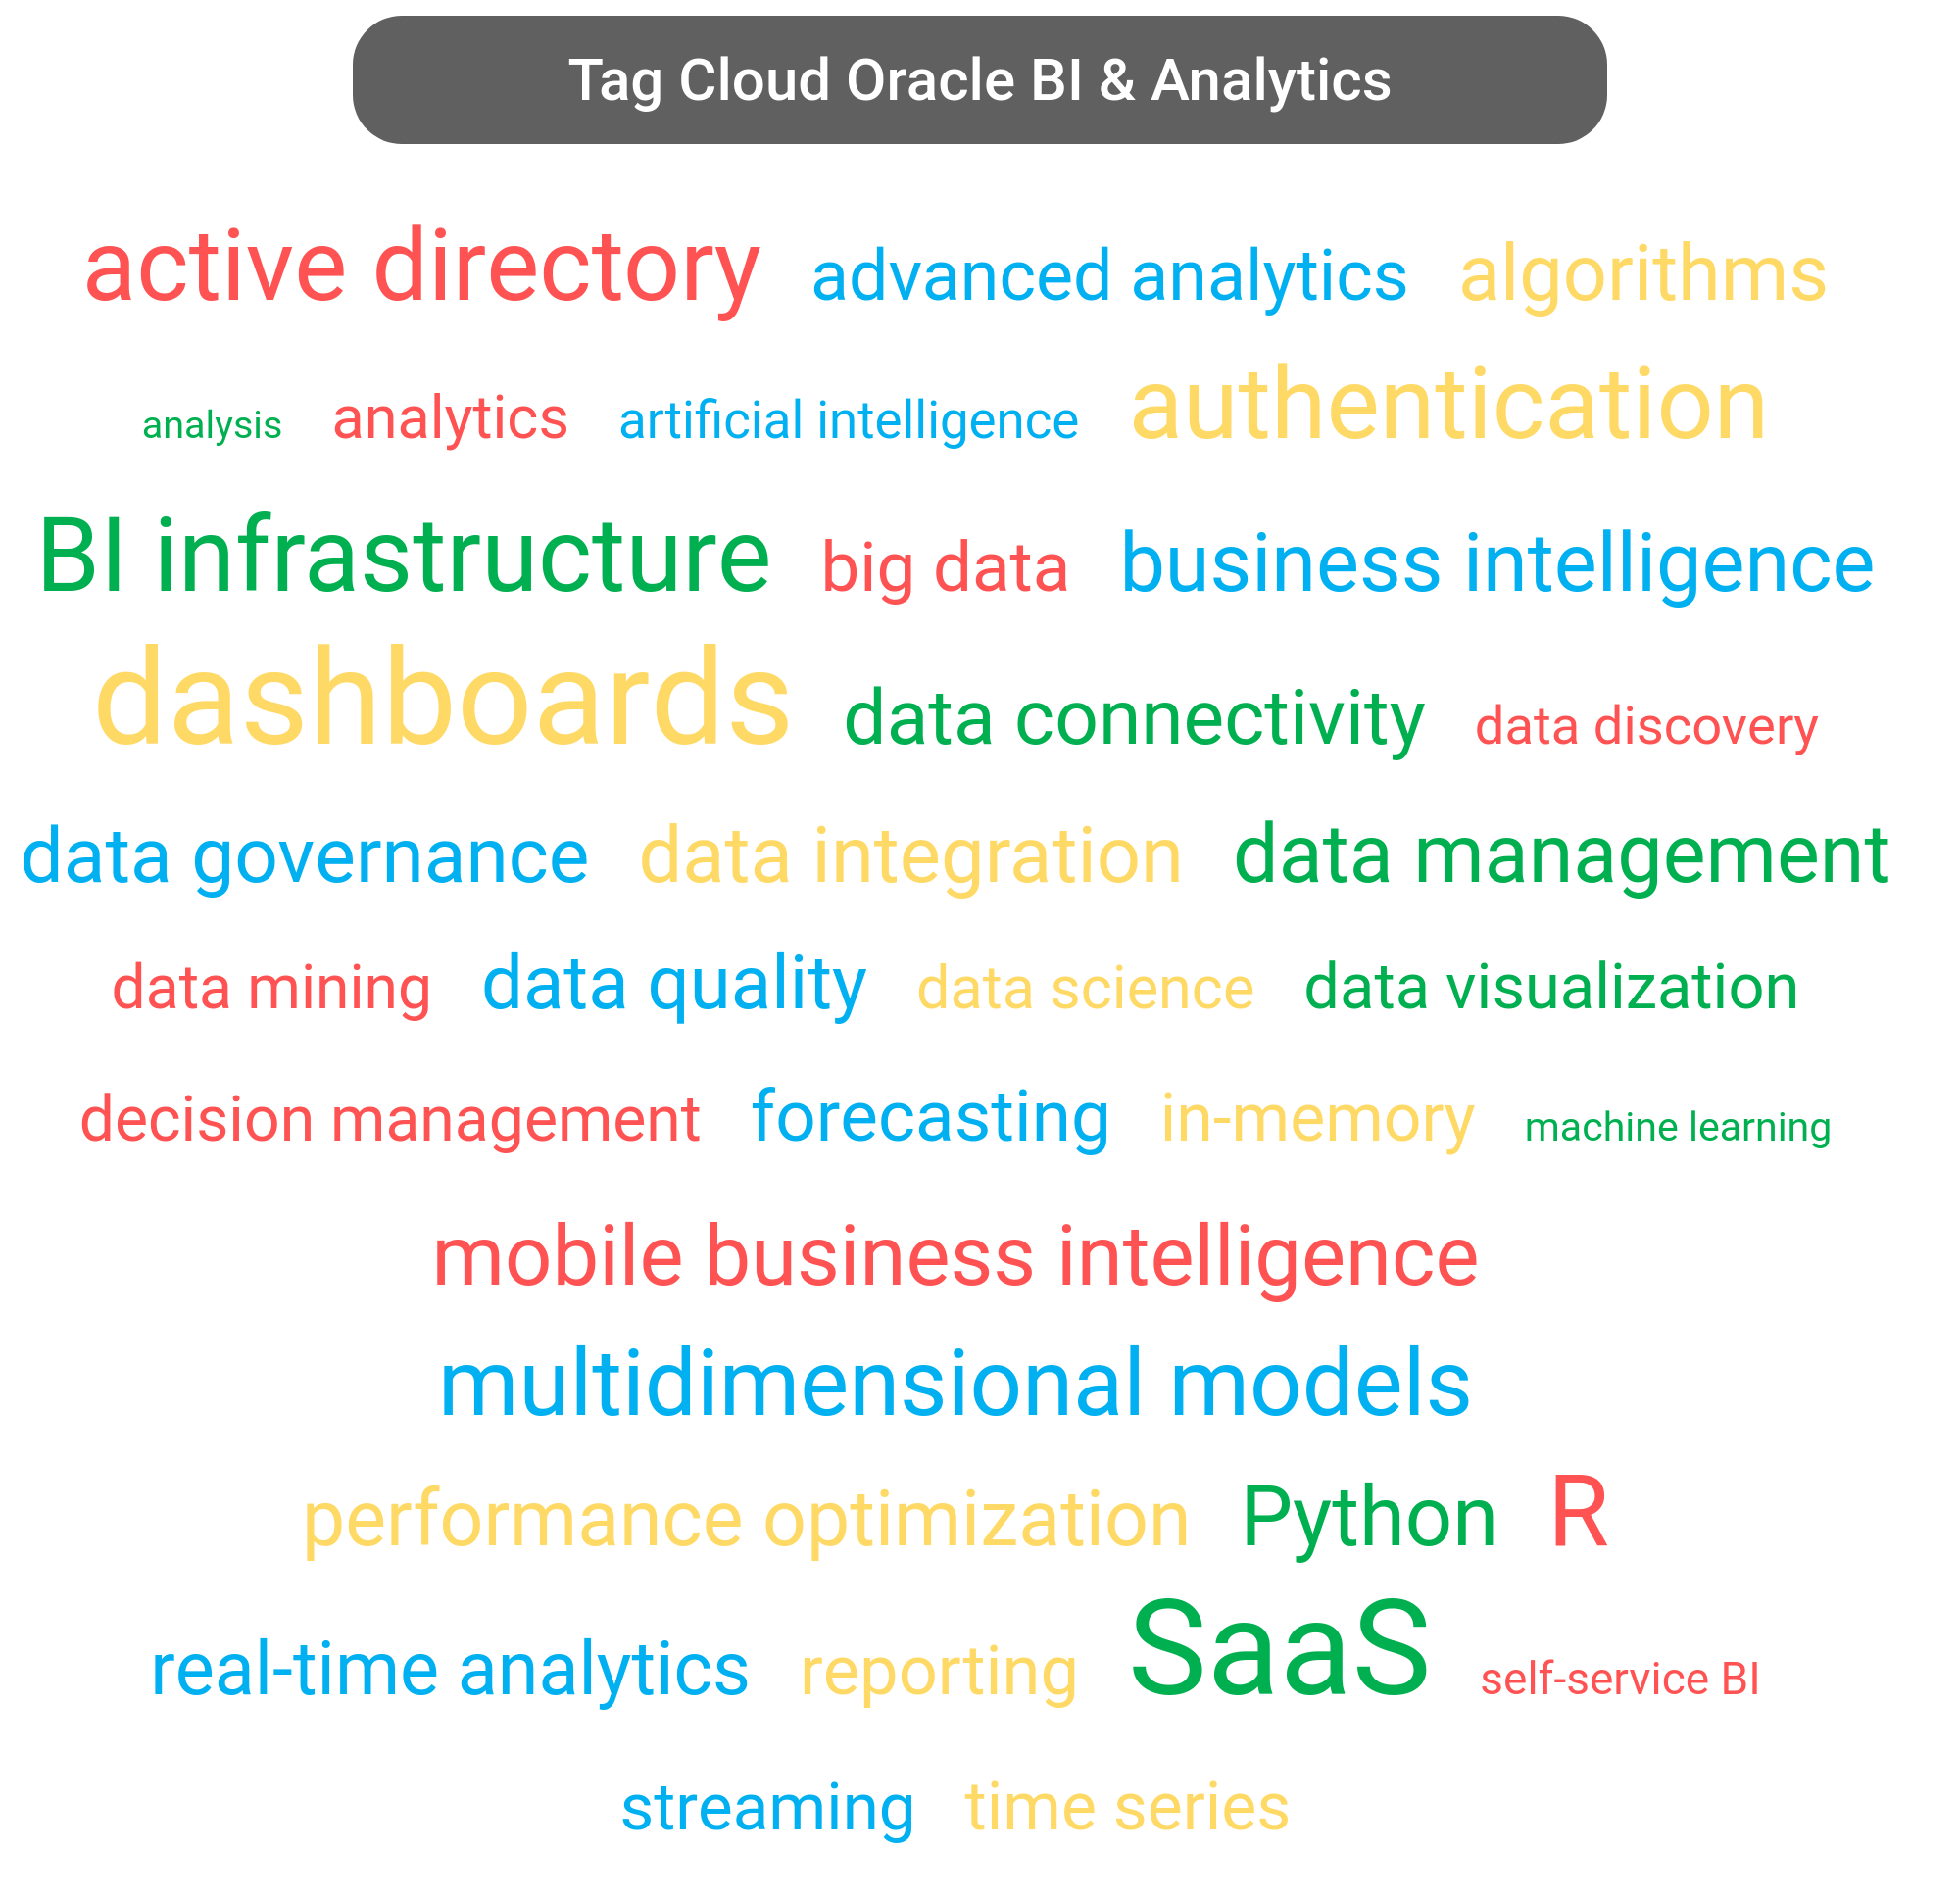 Tag cloud of the Oracle Analytics tools.